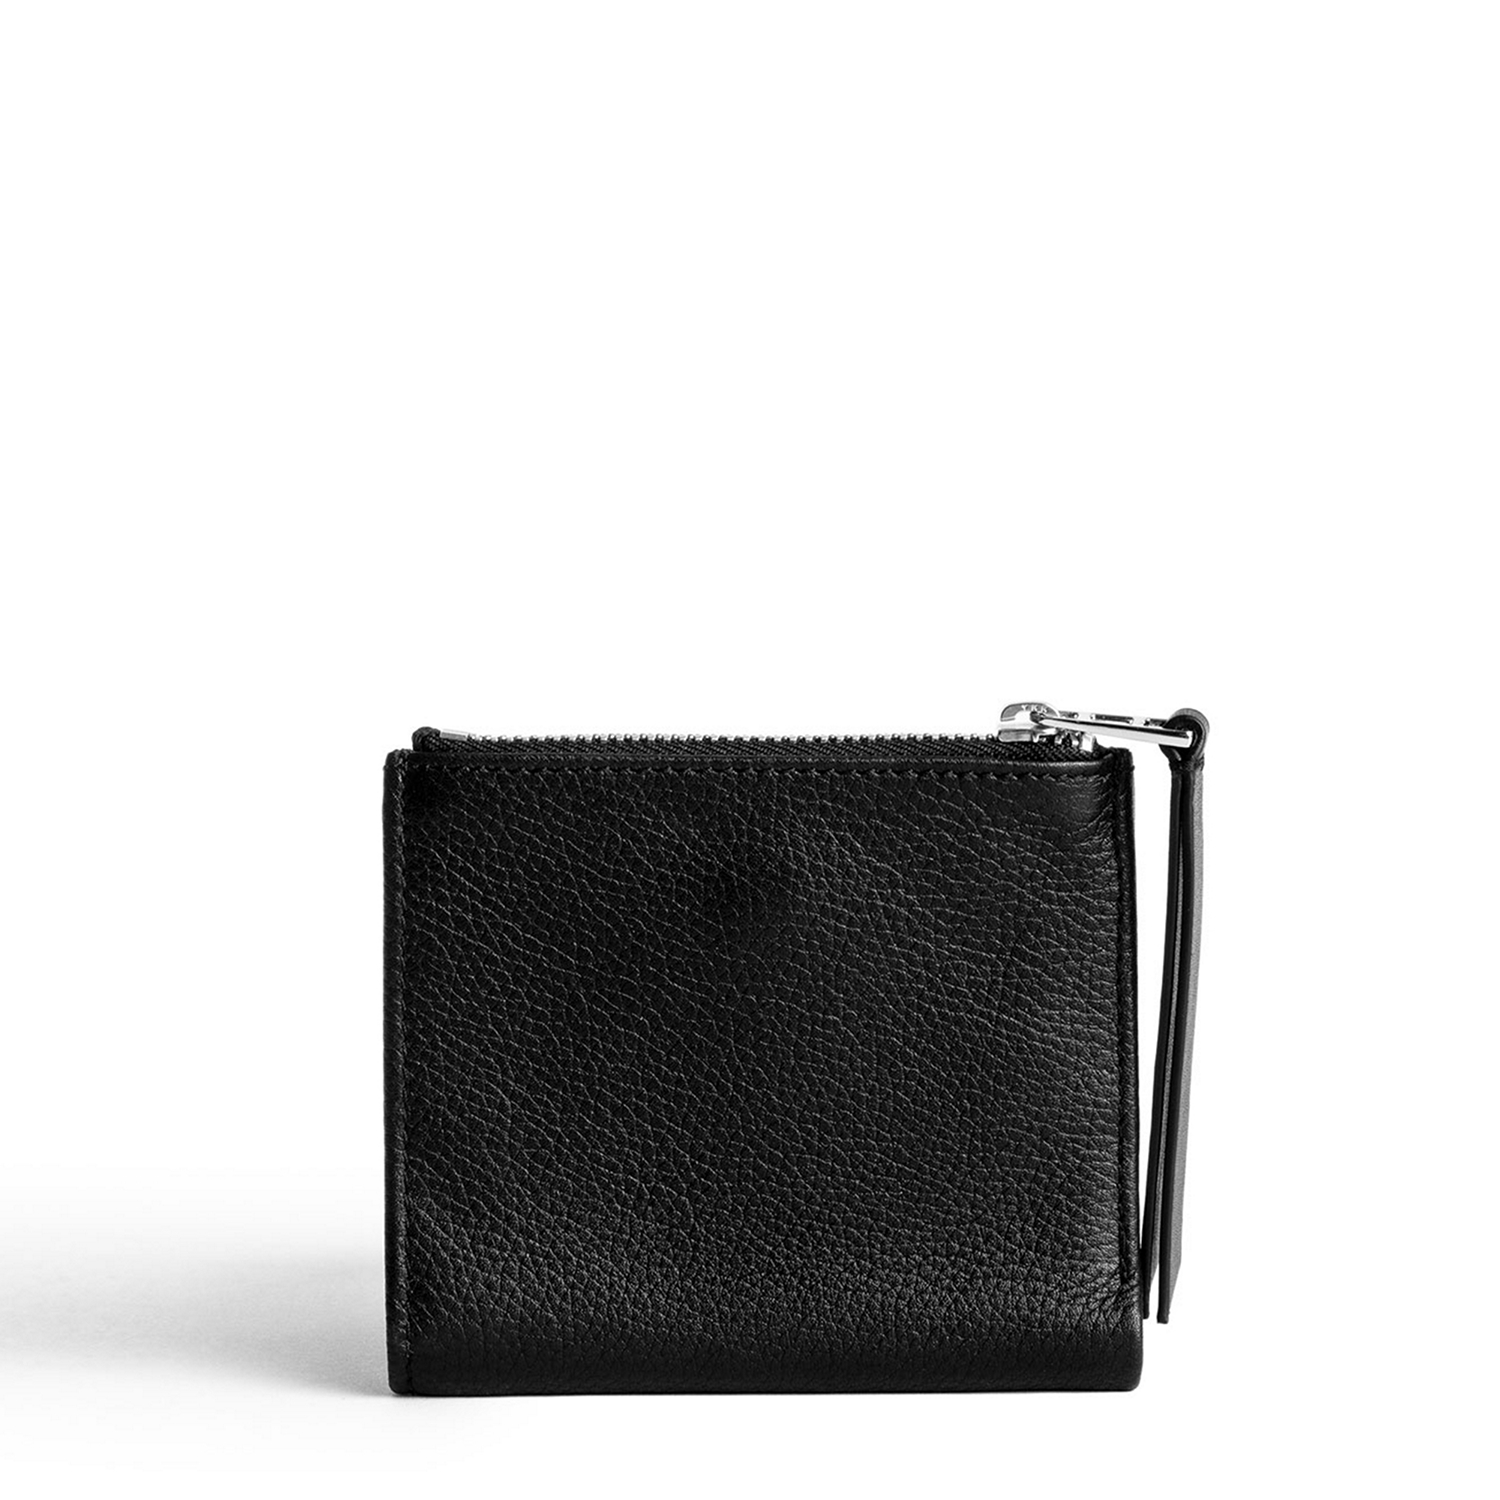 ZV Fold Grained Leather Purse